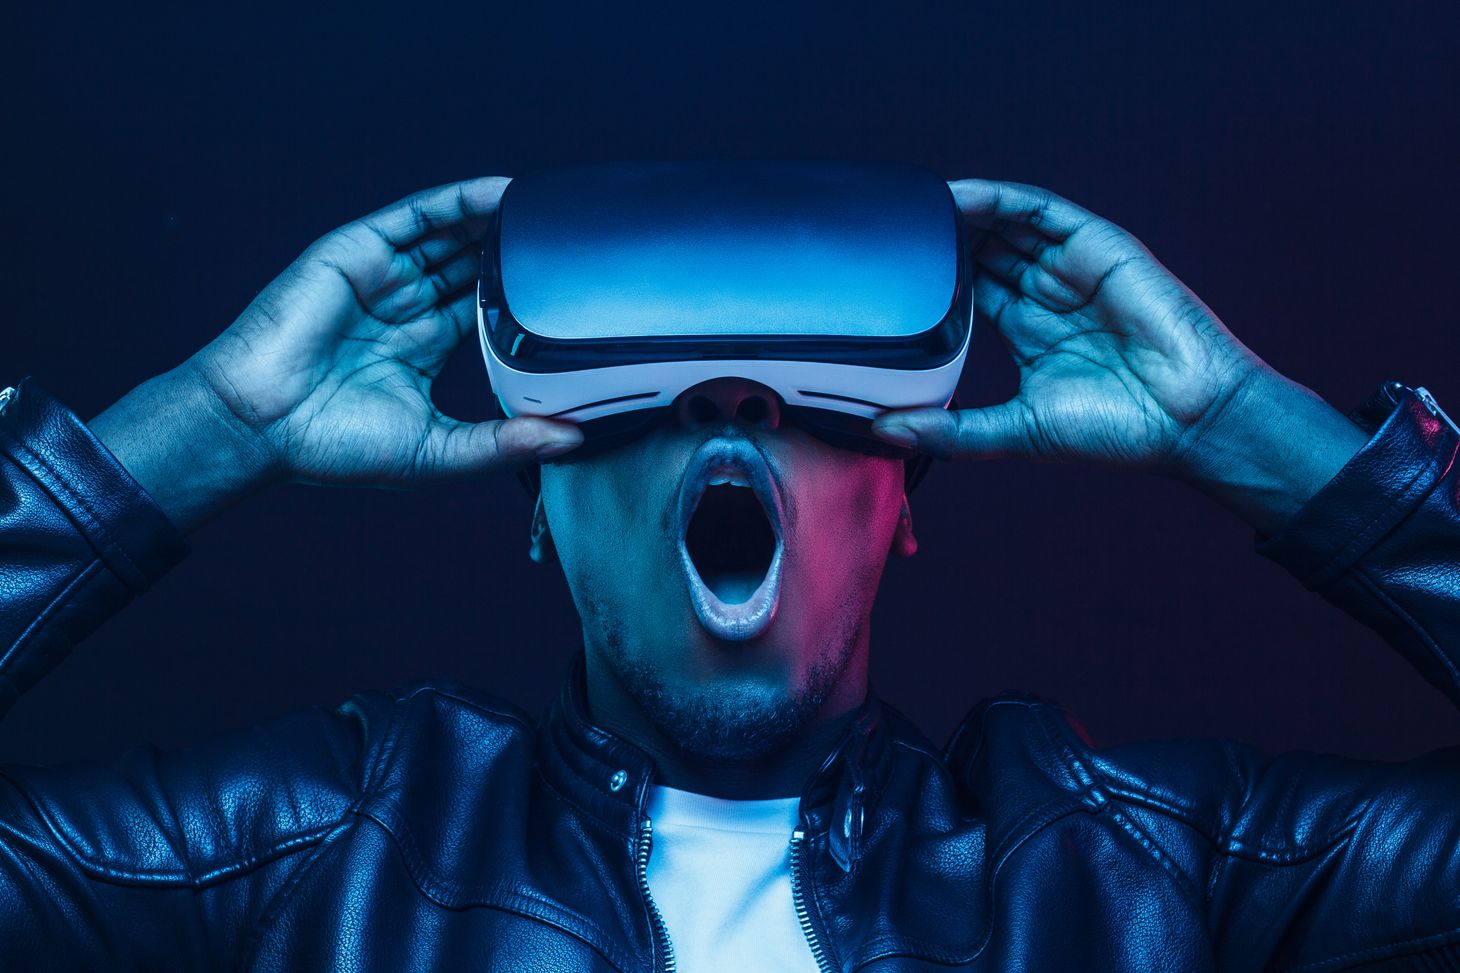 Image of a person with VR goggles who is being shocked by what he sees